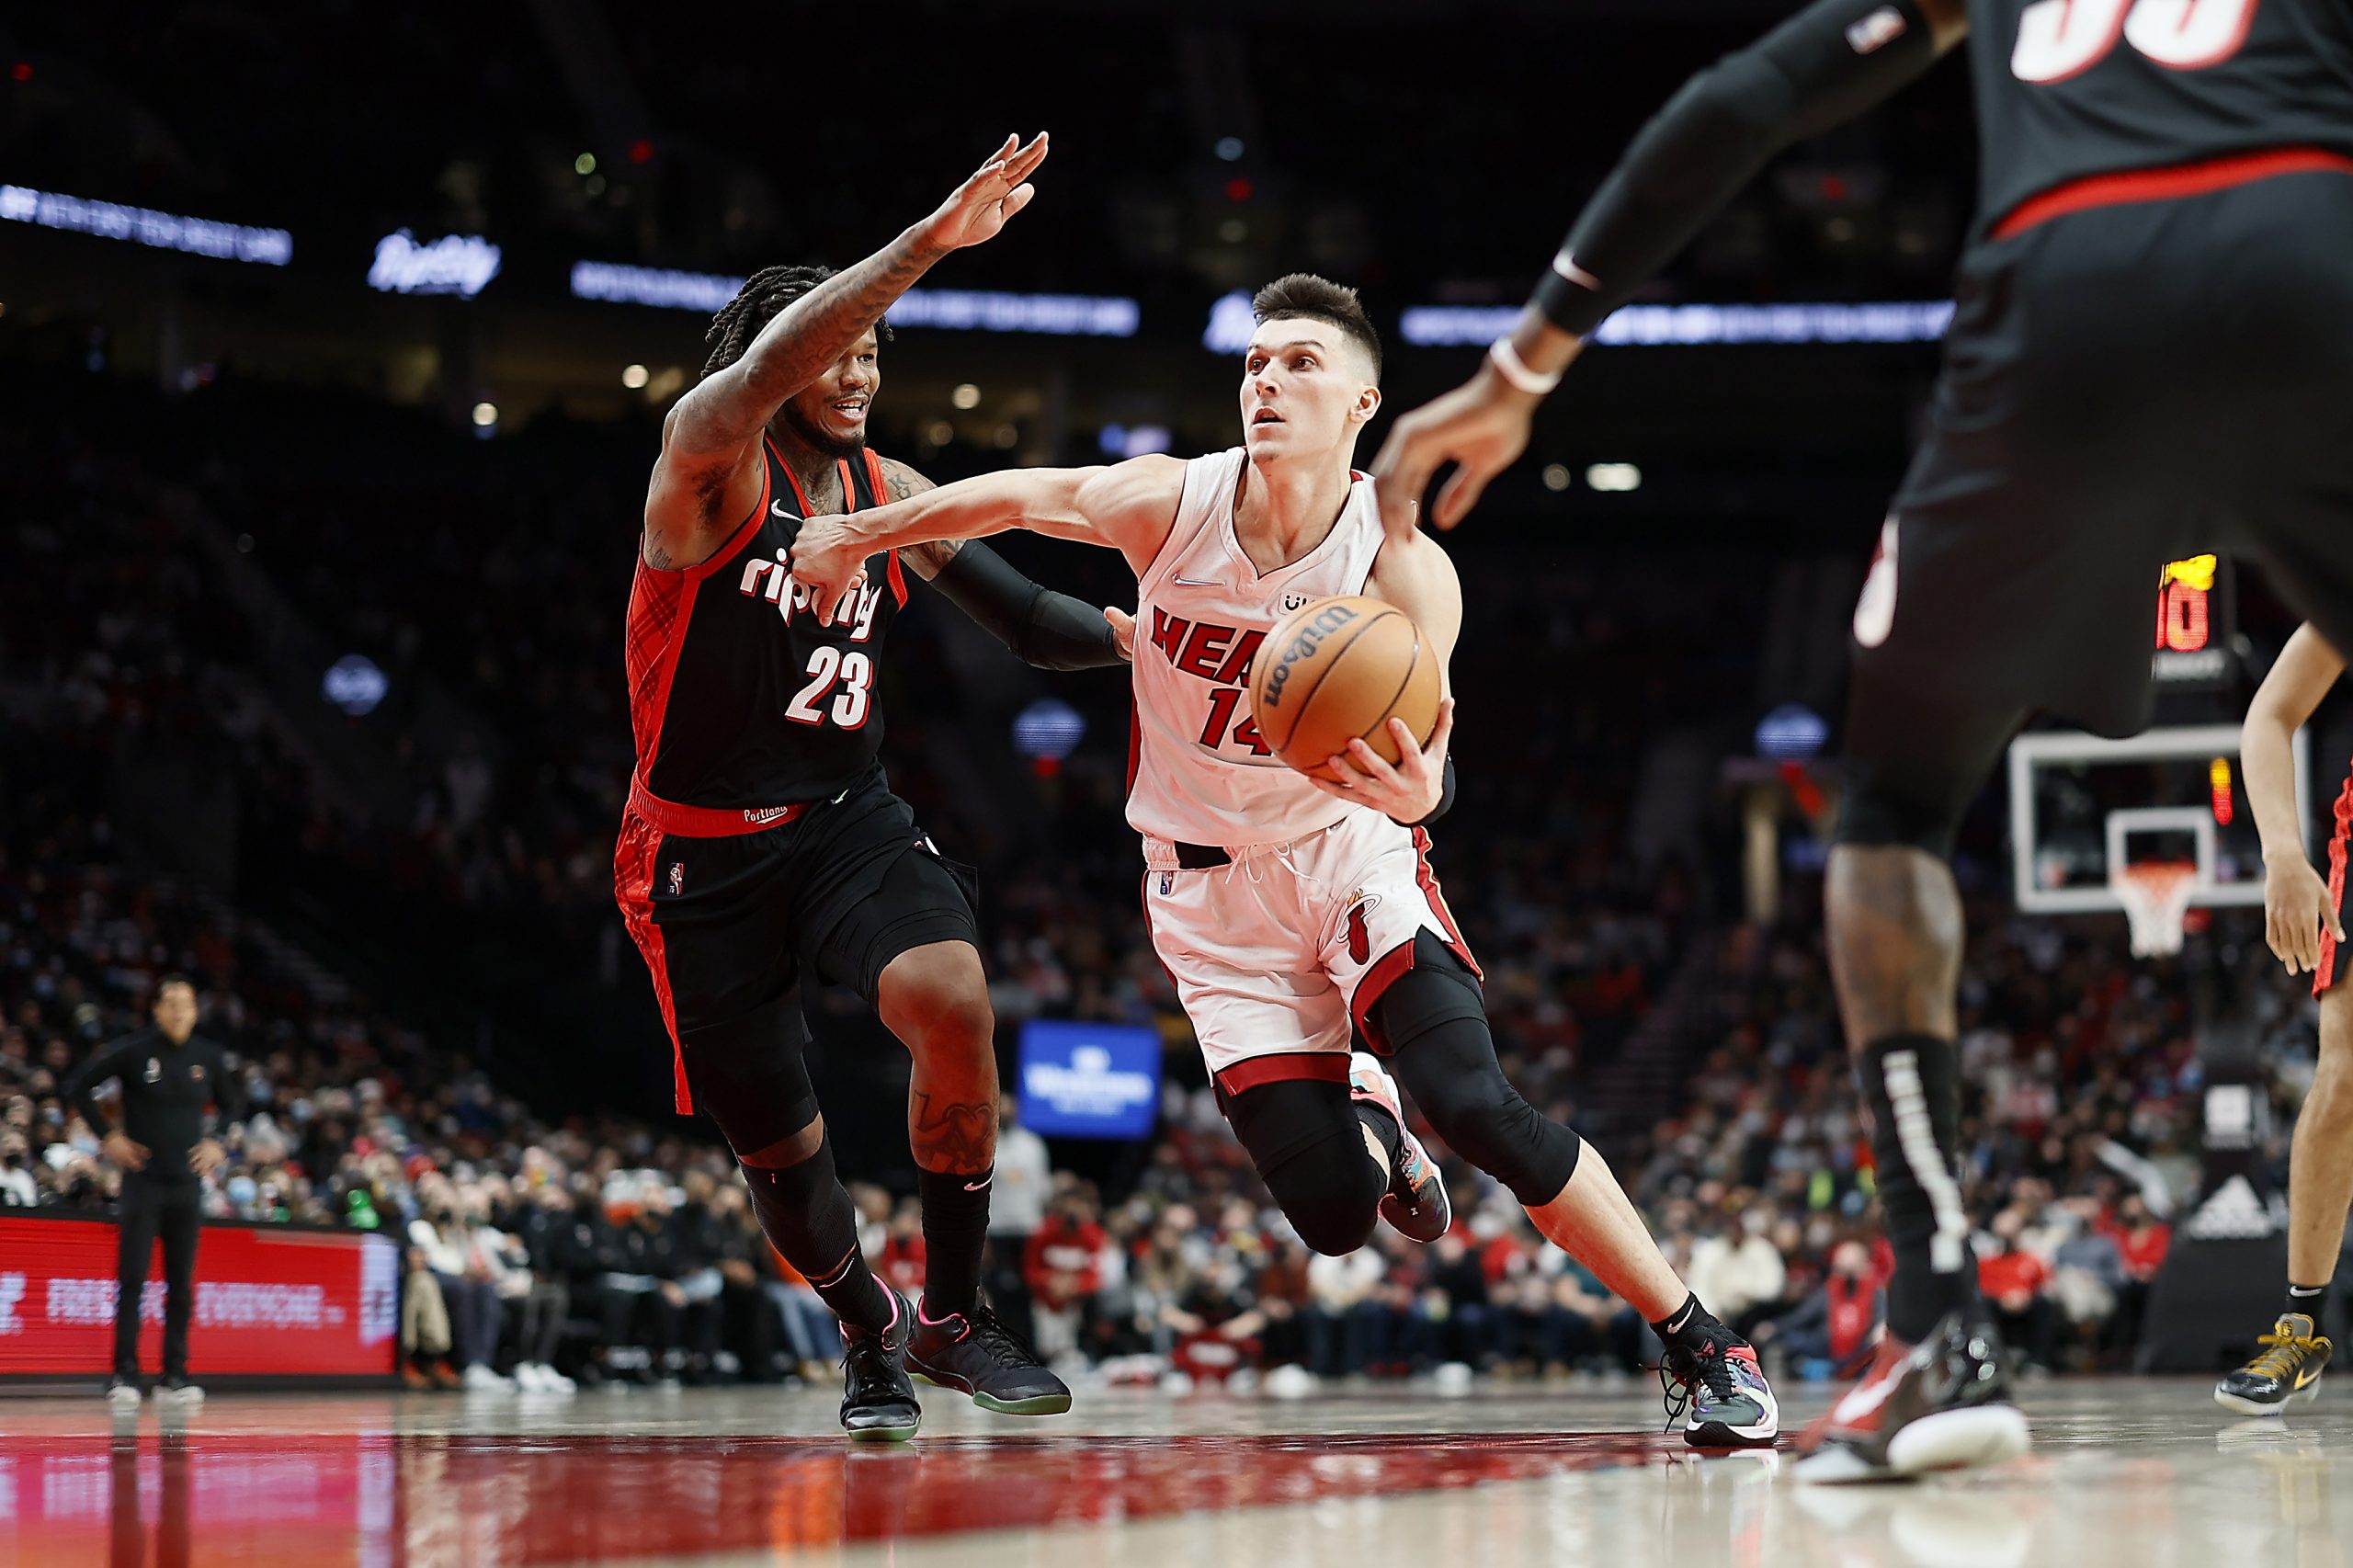 Miami Heat Guard Tyler Herro Deserving of Several Top Awards After Displaying Great Growth